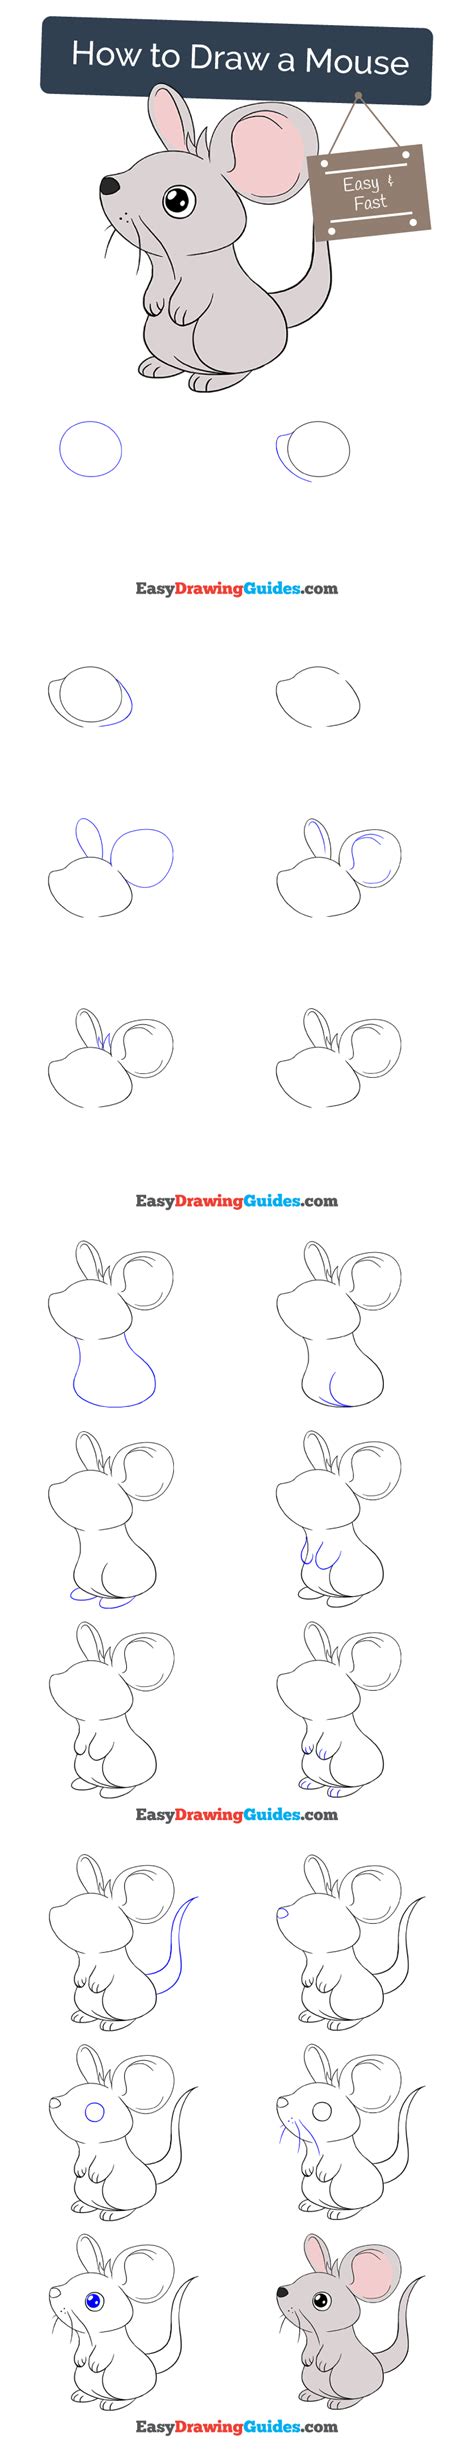 How to Draw an Easy Mouse - Really Easy Drawing Tutorial | Drawing tutorial, Drawing for kids ...